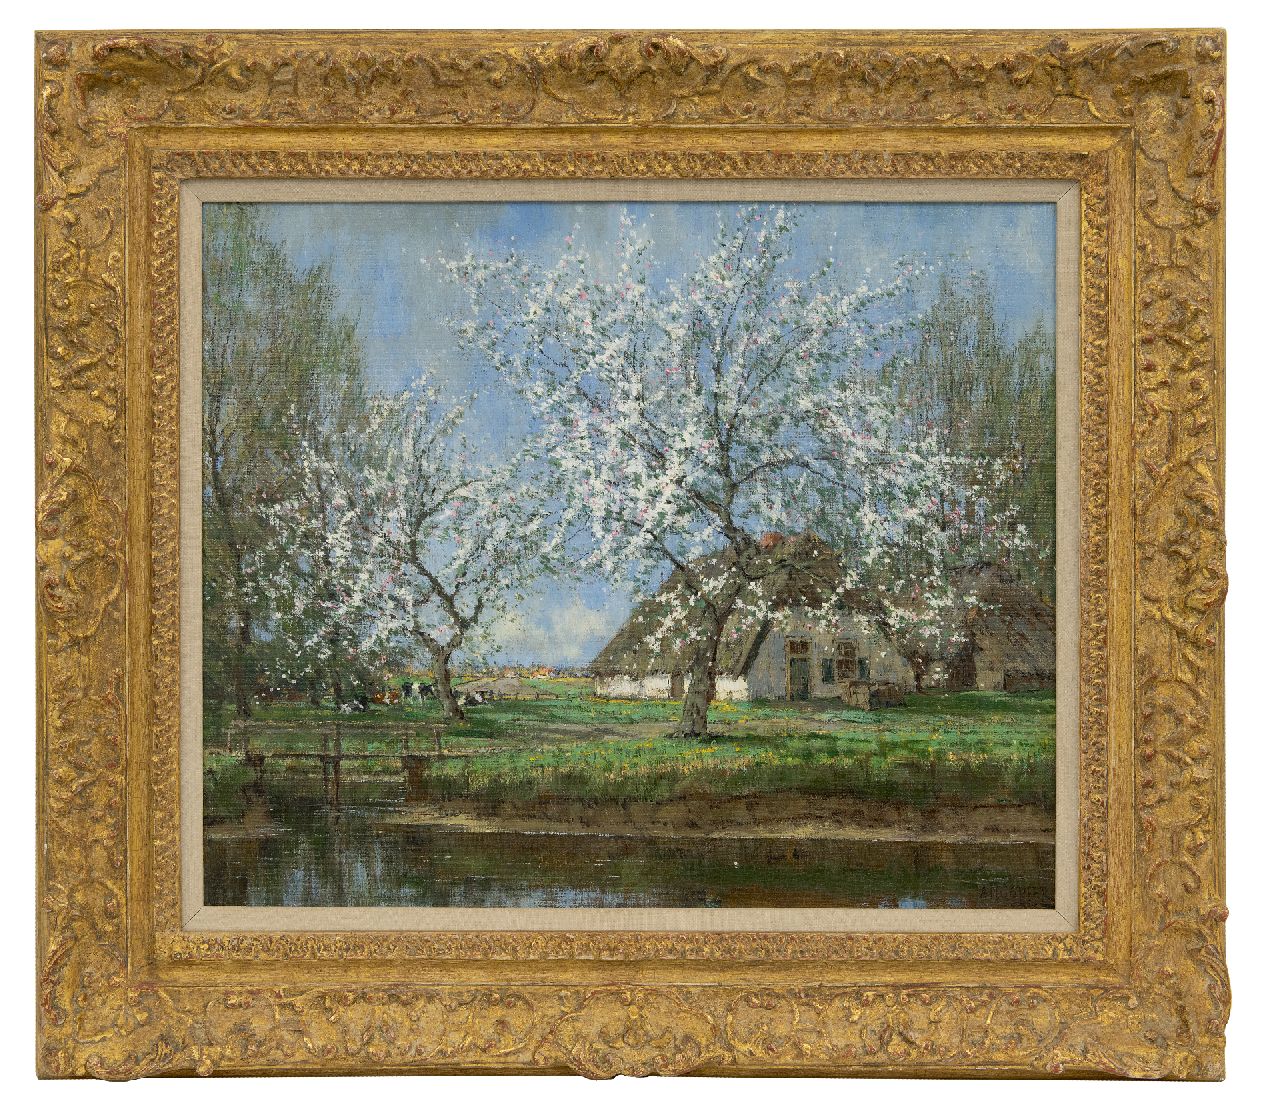 Gorter A.M.  | 'Arnold' Marc Gorter, Spring blossom, oil on canvas 46.3 x 56.3 cm, signed l.r.